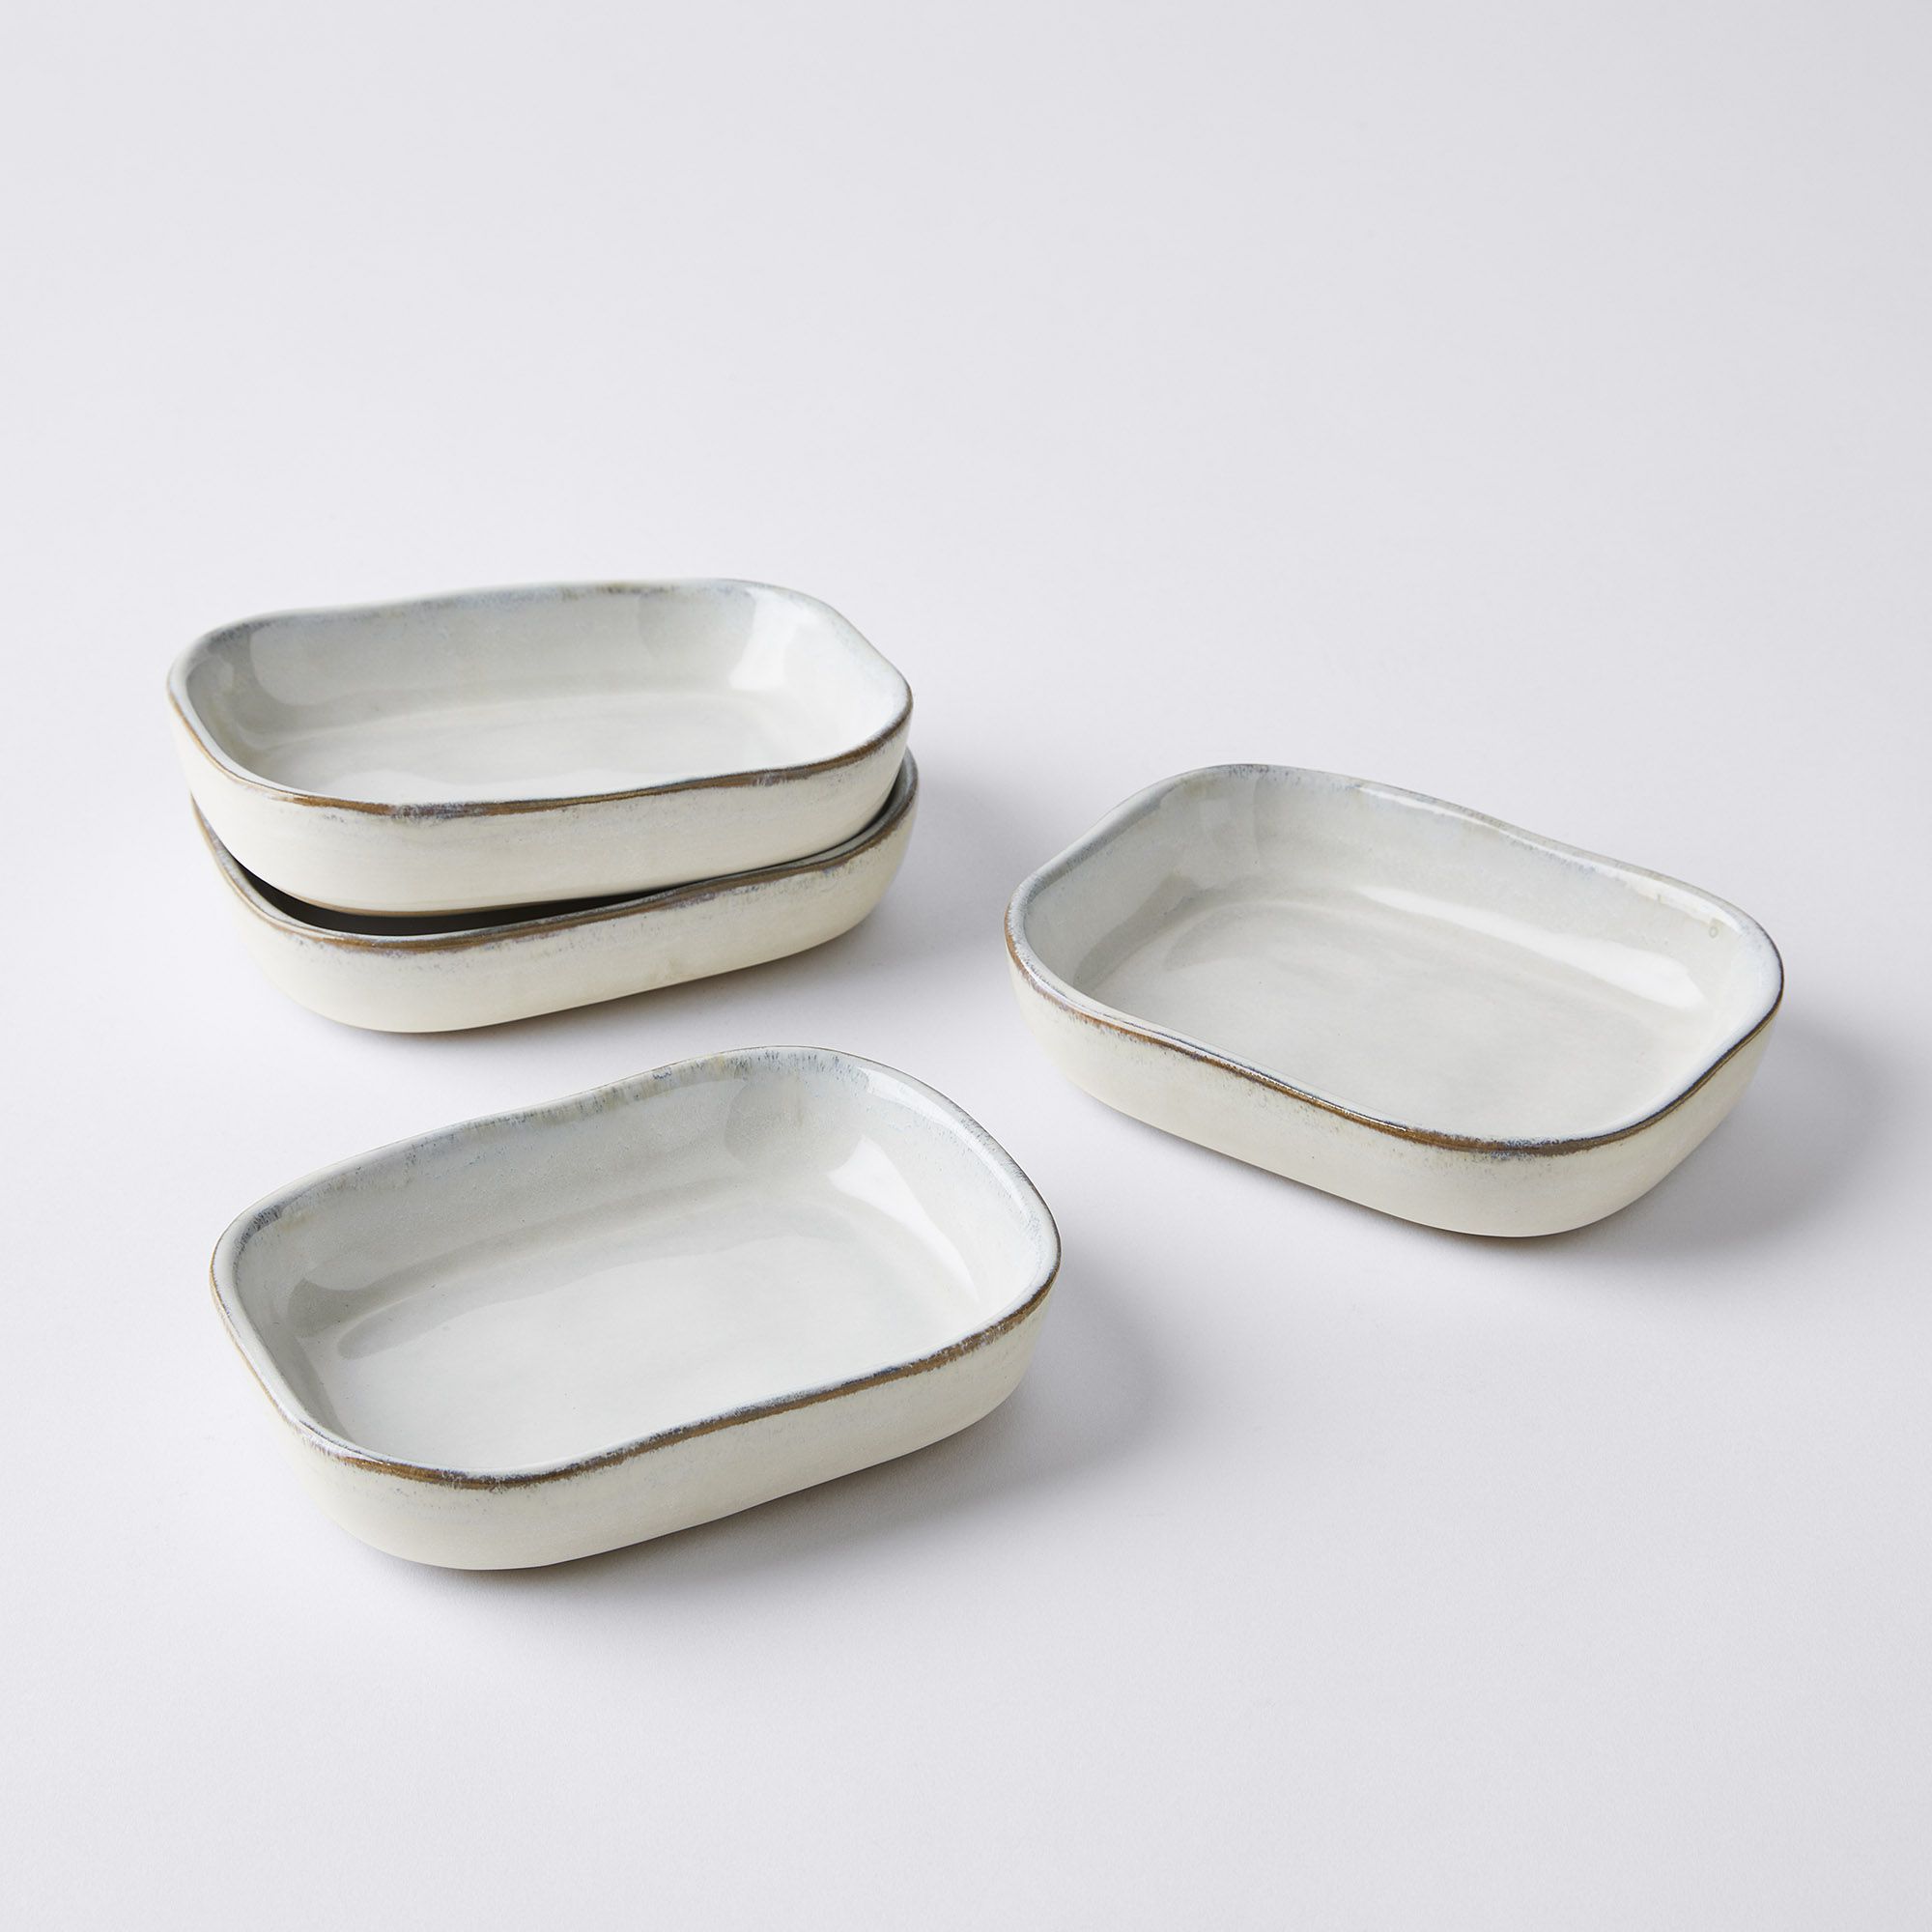 Dishes by Kathy Sharkey